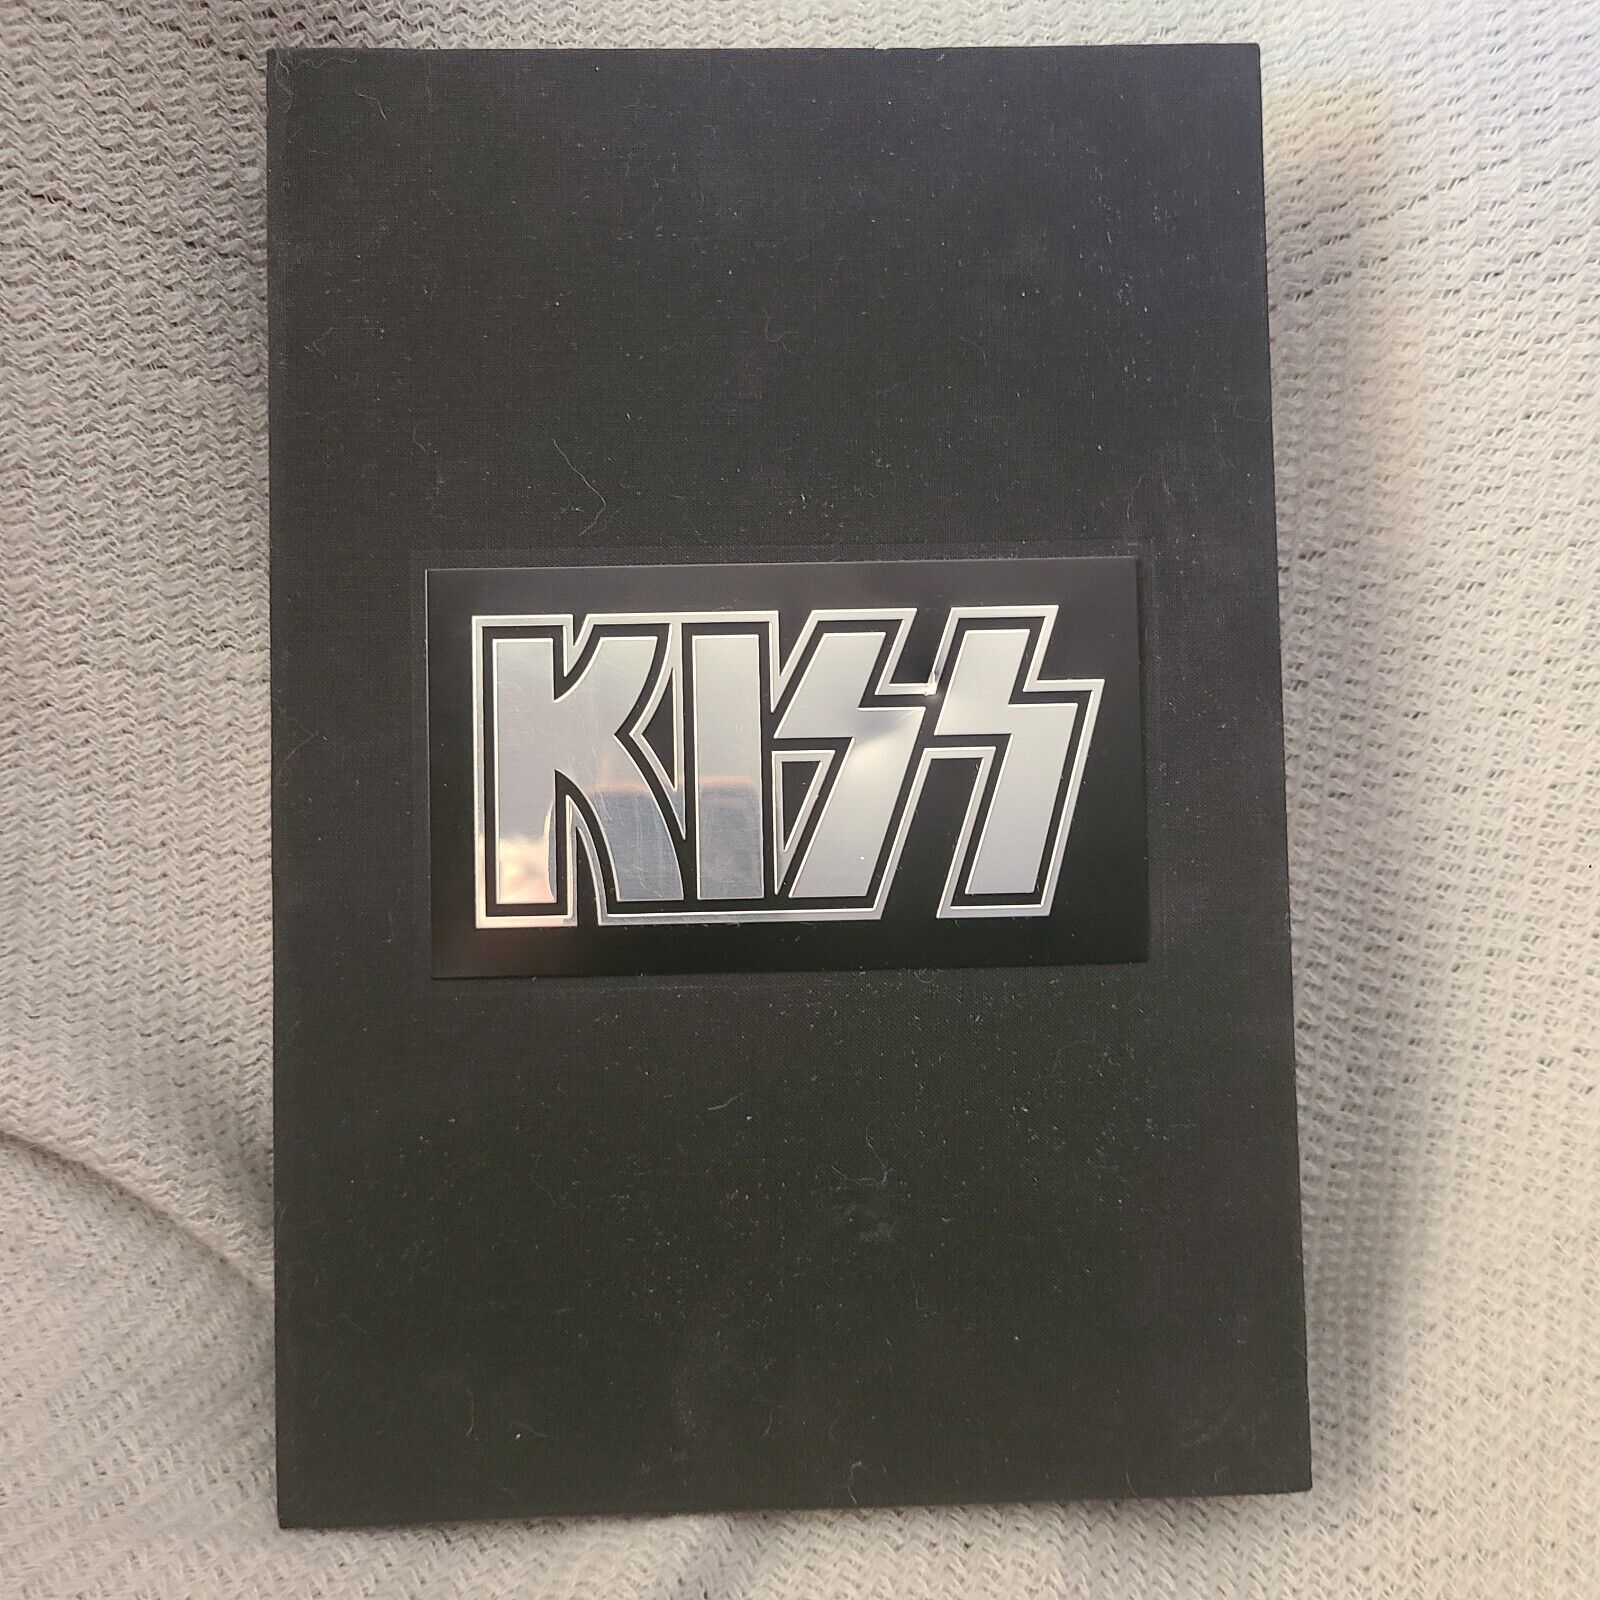 KISS-The Definitive Kiss Collection - 5 CD Box Set - with booklet. CD\'s unopened